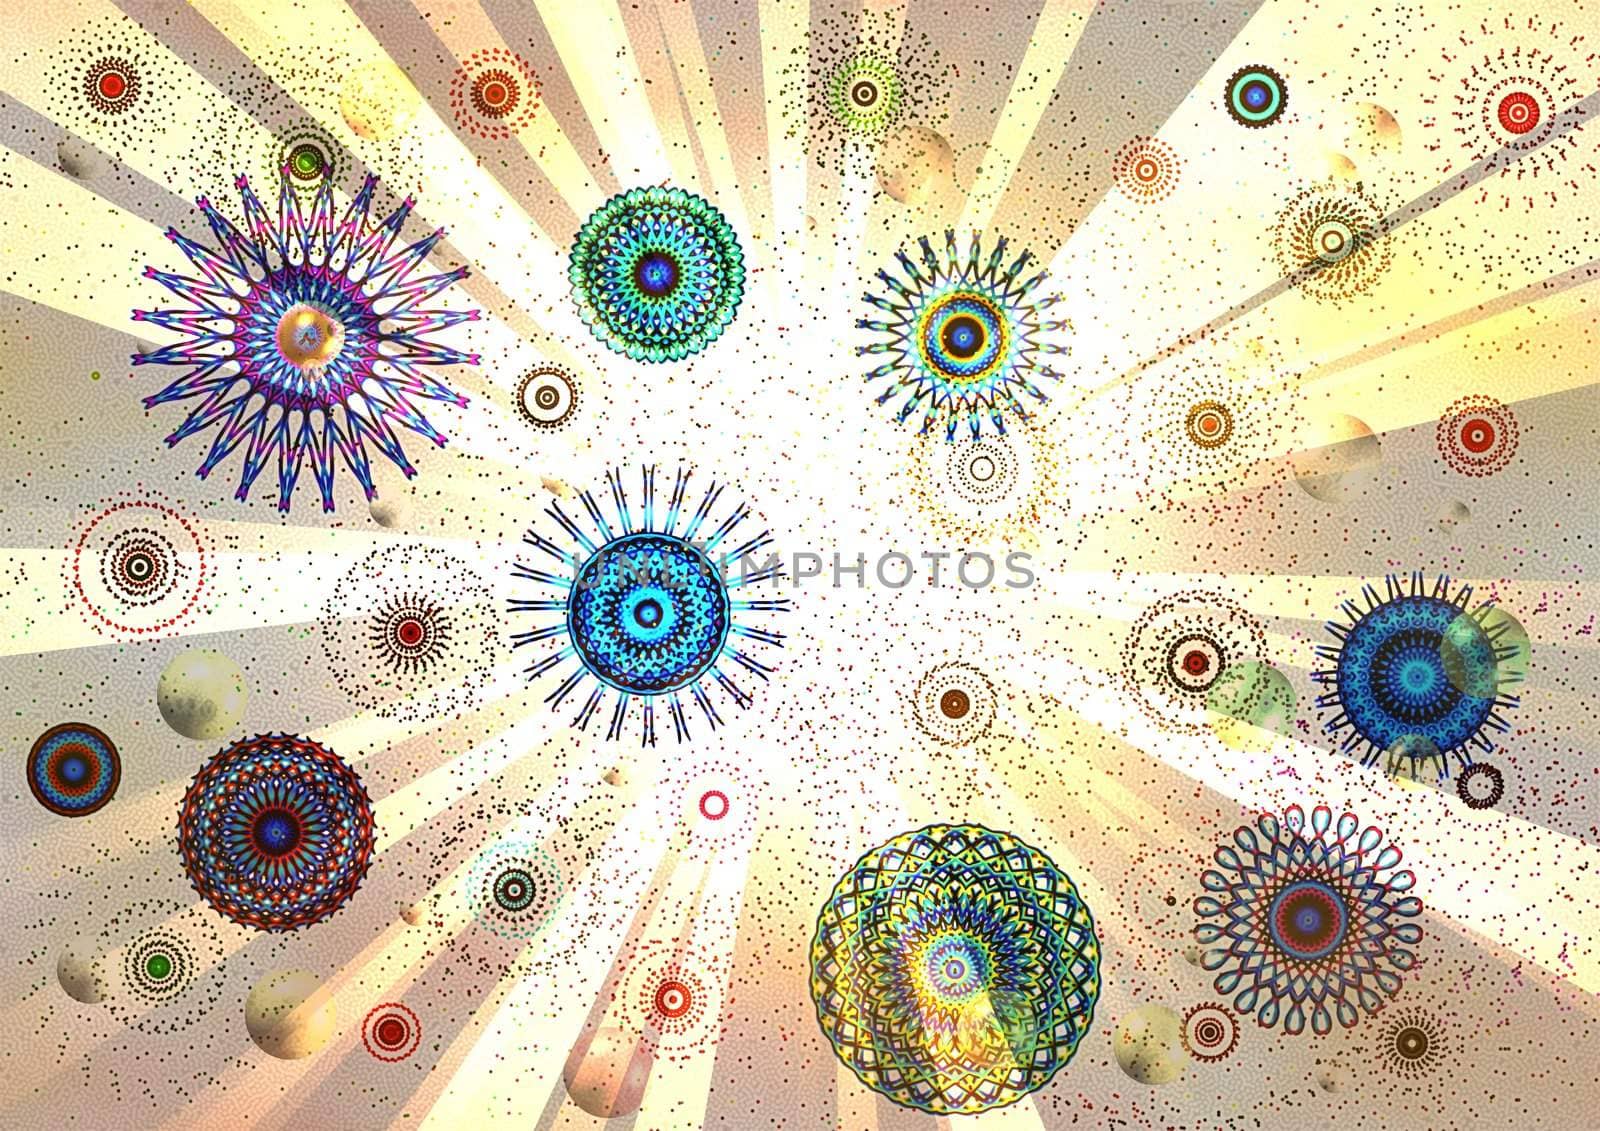 abstract image of a bright background, with creative products